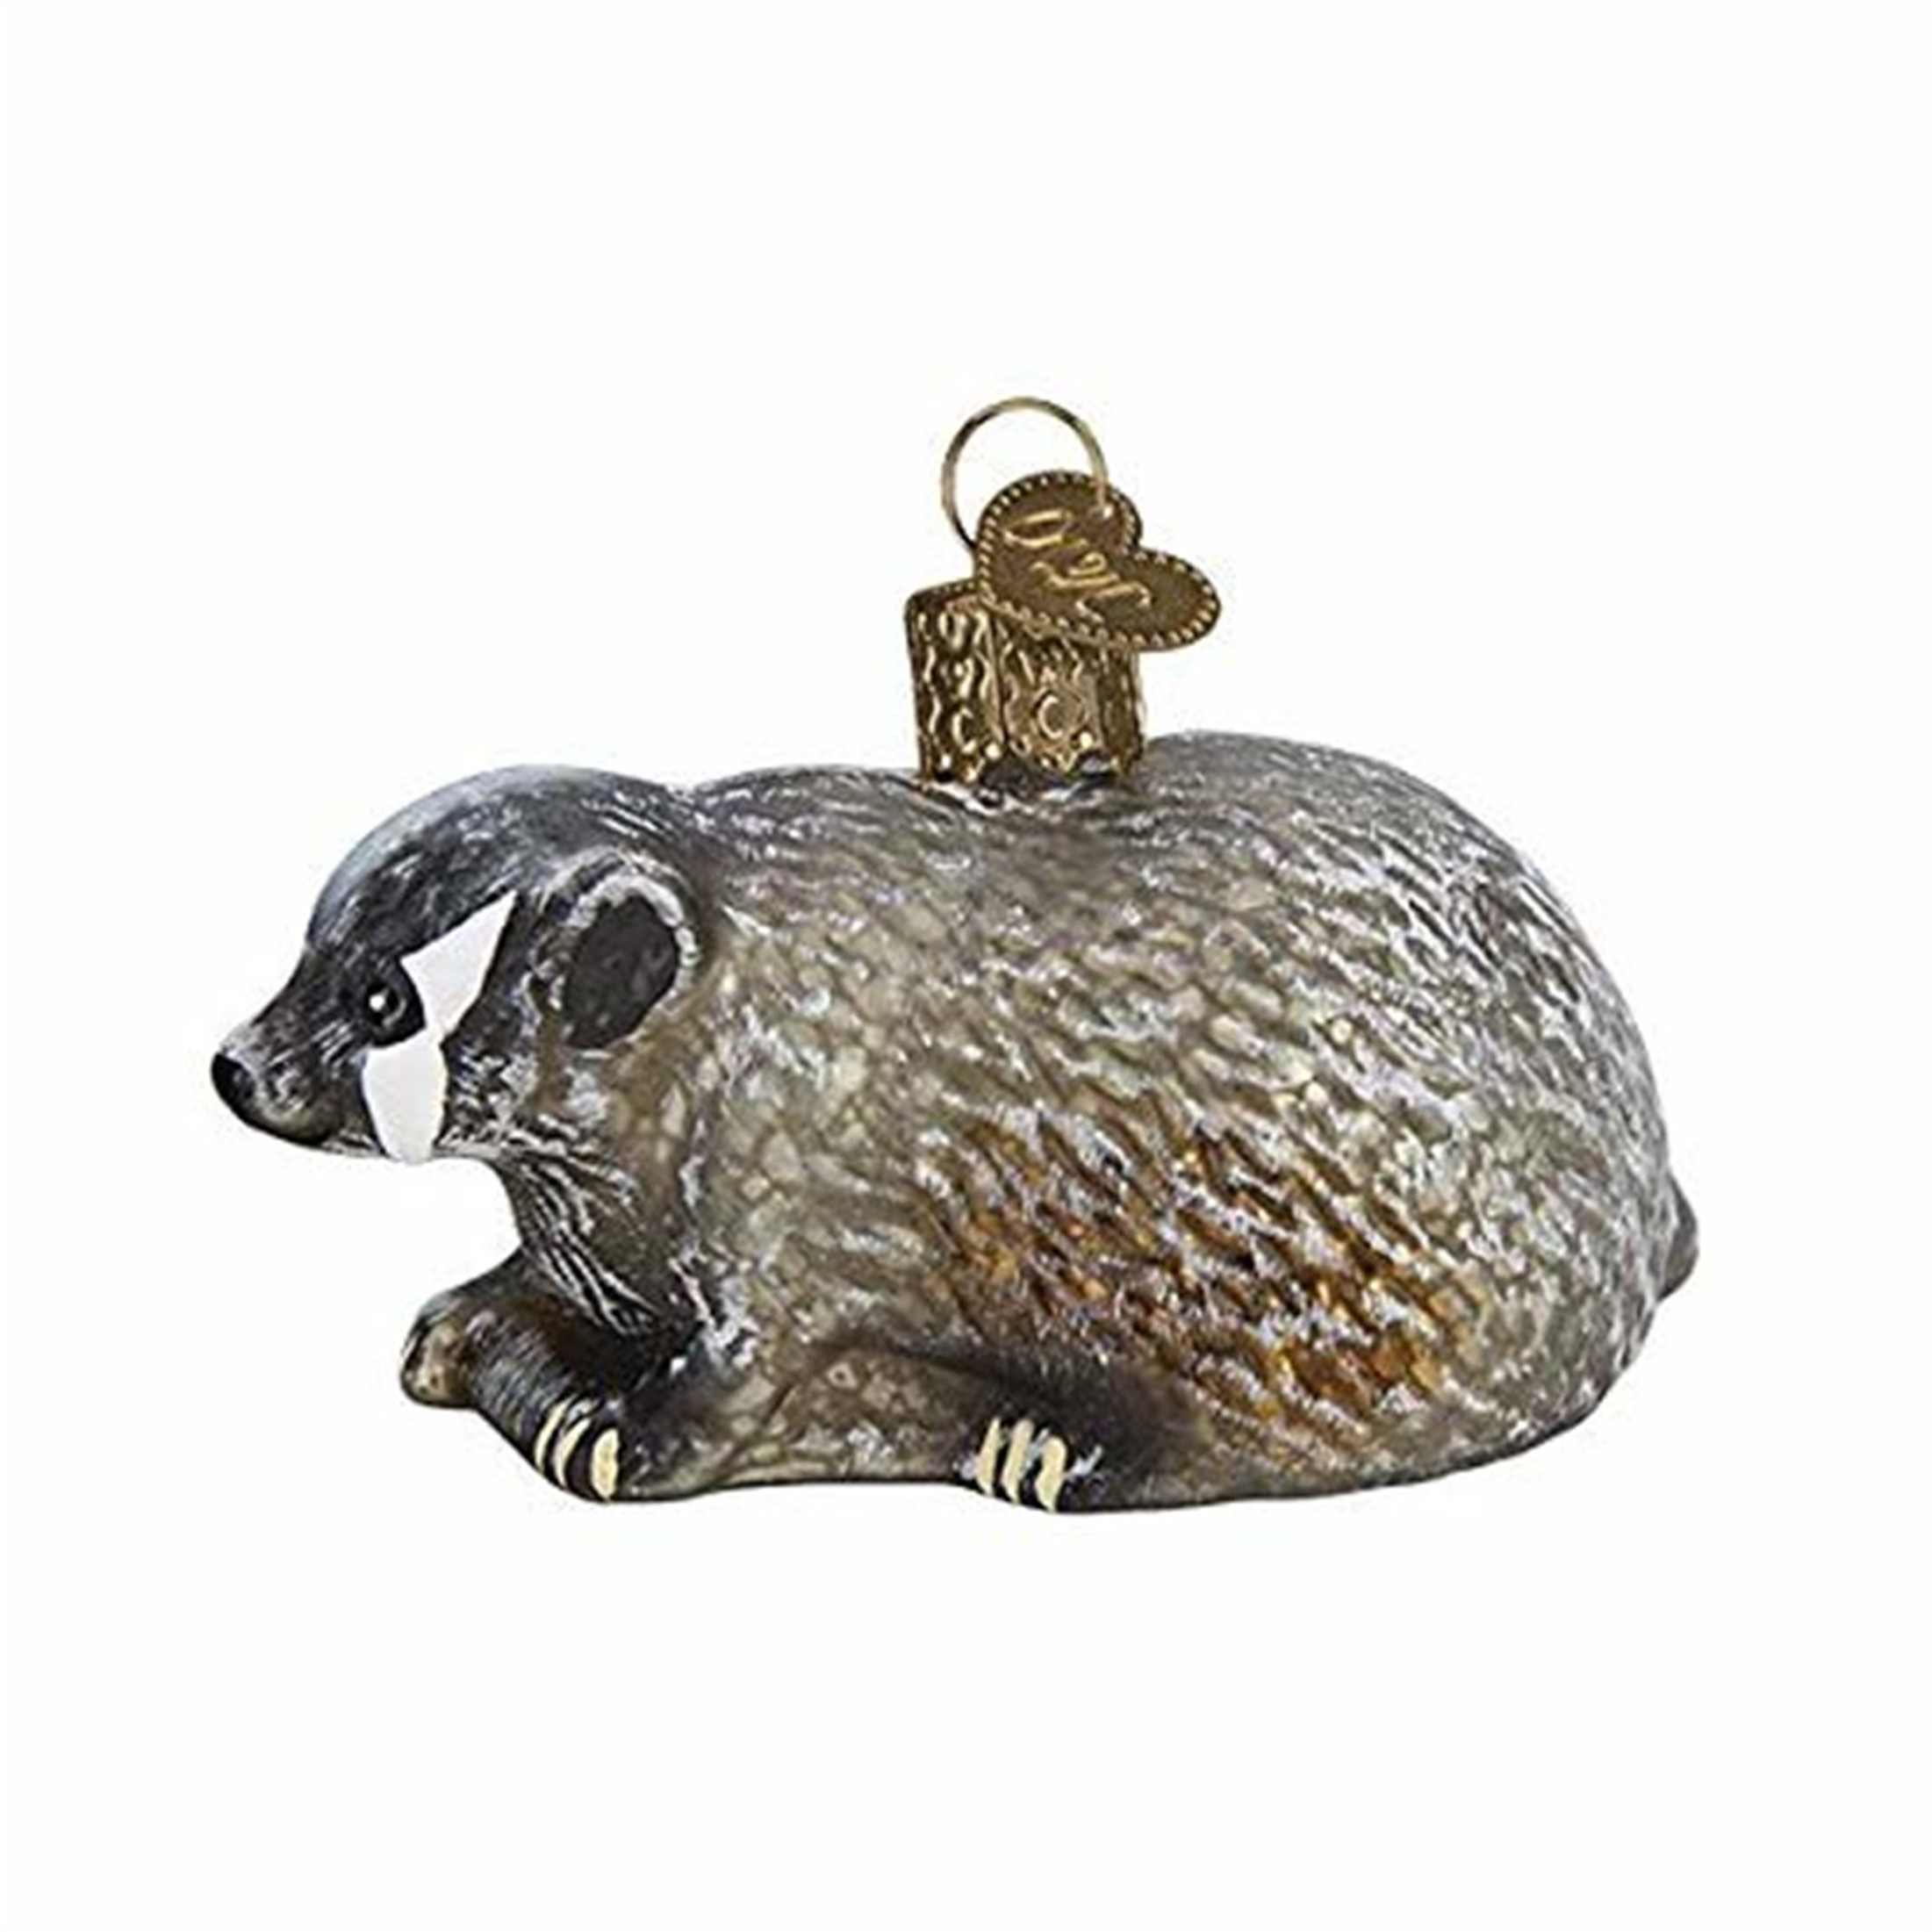 Old World Christmas Glass Blown Ornament For Christmas Tree, Vintage Badger (With OWC Gift Box)